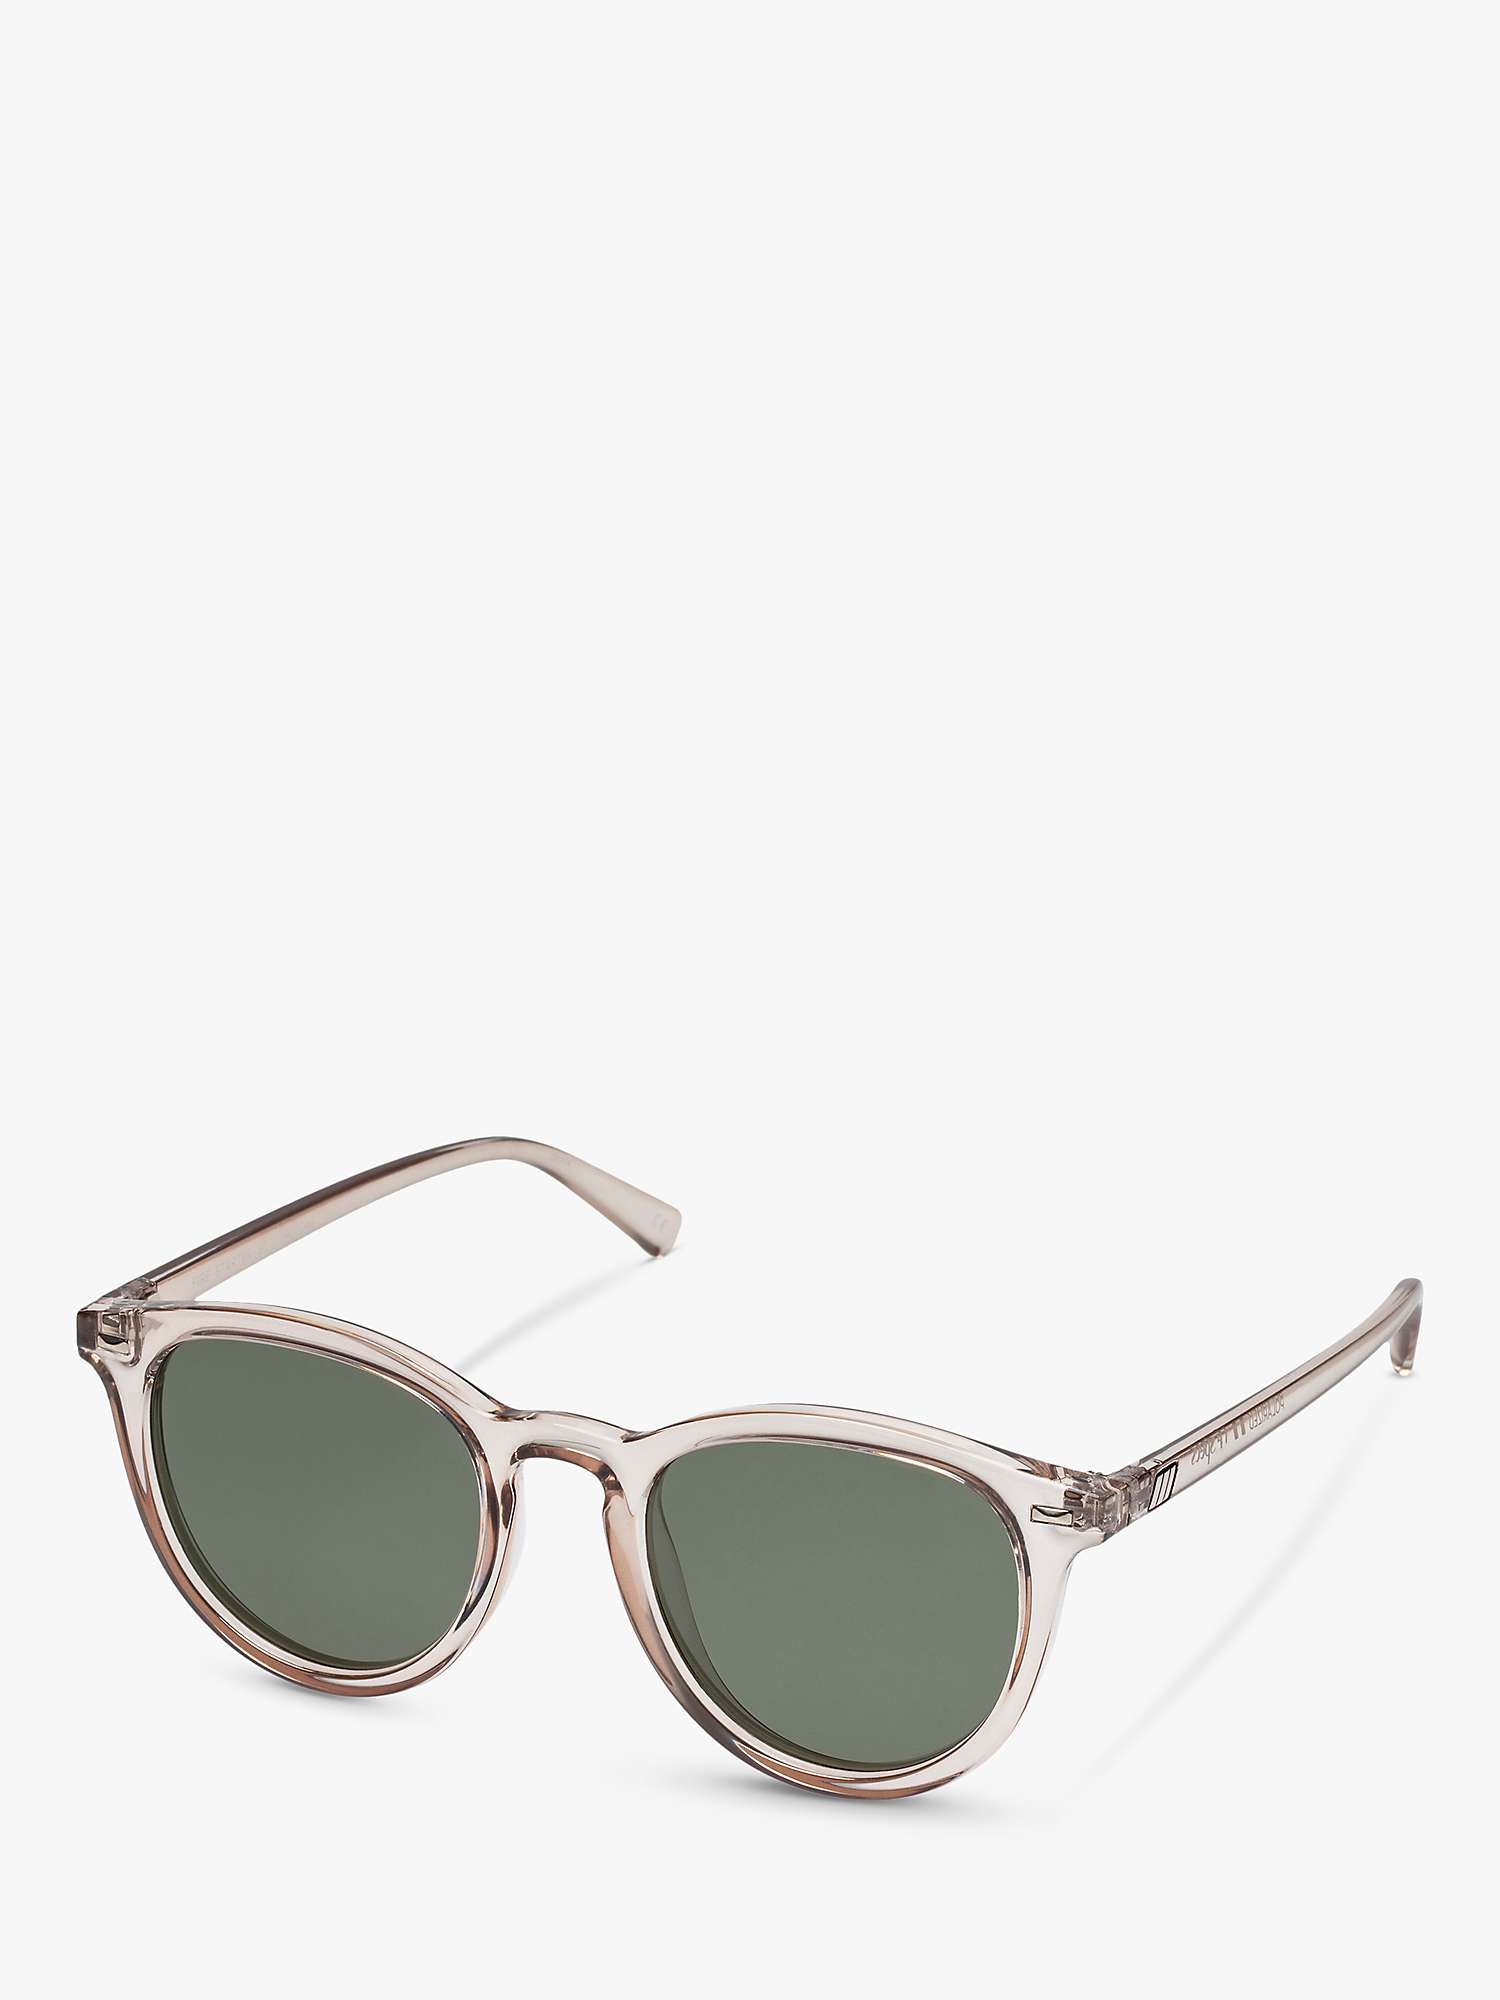 Buy Le Specs L5000148 Unisex Polarised Oval Sunglasses, Clear/Brown Online at johnlewis.com